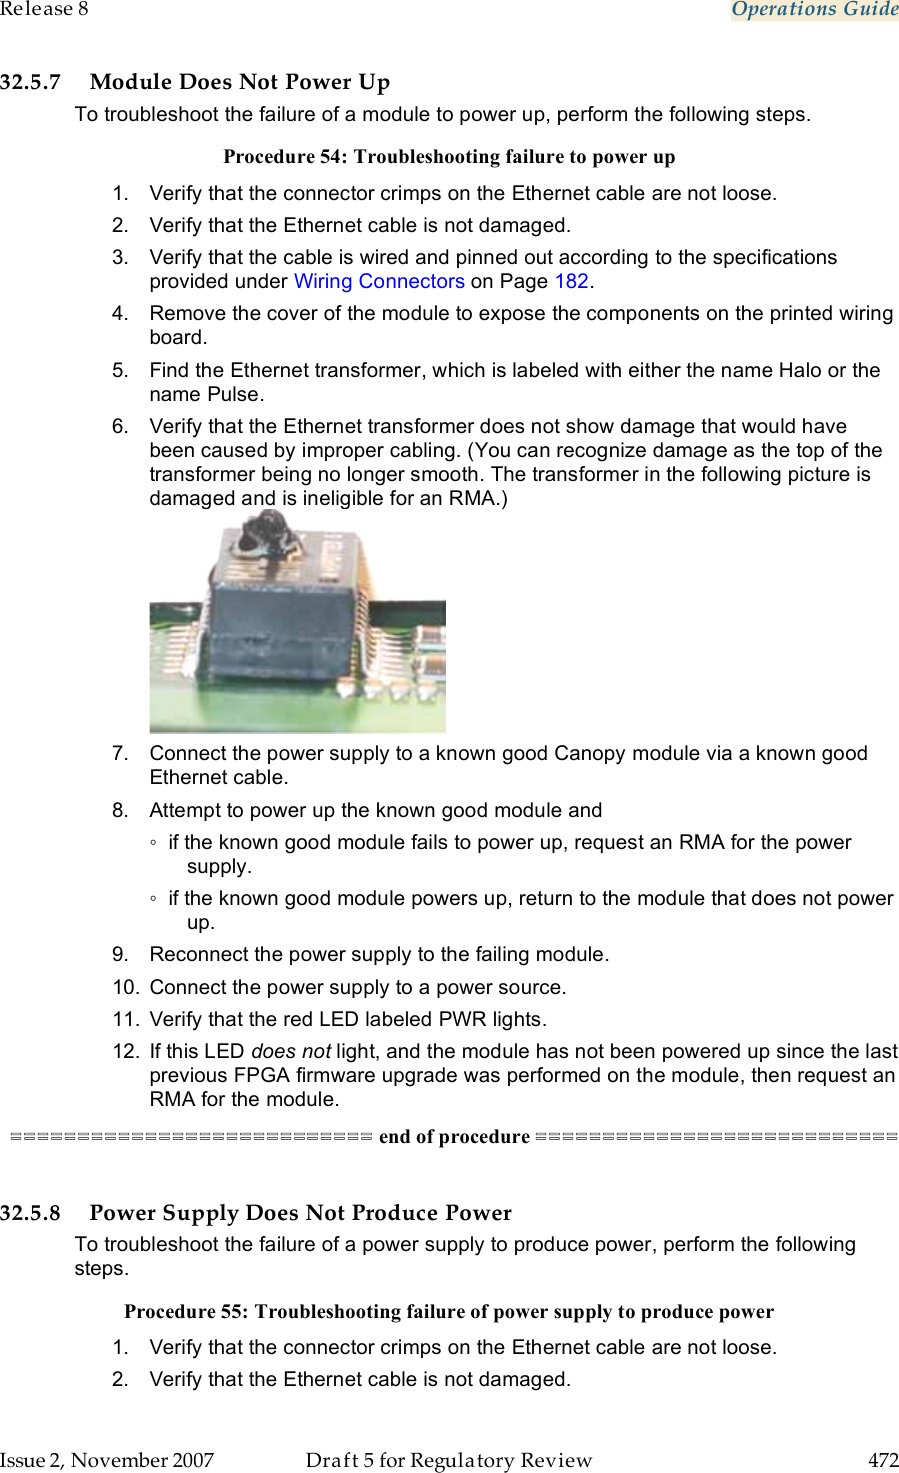 Release 8    Operations Guide   Issue 2, November 2007  Draft 5 for Regulatory Review  472     32.5.7 Module Does Not Power Up To troubleshoot the failure of a module to power up, perform the following steps. Procedure 54: Troubleshooting failure to power up 1.  Verify that the connector crimps on the Ethernet cable are not loose. 2.  Verify that the Ethernet cable is not damaged. 3.  Verify that the cable is wired and pinned out according to the specifications provided under Wiring Connectors on Page 182. 4.  Remove the cover of the module to expose the components on the printed wiring board. 5.  Find the Ethernet transformer, which is labeled with either the name Halo or the name Pulse.  6.  Verify that the Ethernet transformer does not show damage that would have been caused by improper cabling. (You can recognize damage as the top of the transformer being no longer smooth. The transformer in the following picture is damaged and is ineligible for an RMA.)  7.  Connect the power supply to a known good Canopy module via a known good Ethernet cable.   8.  Attempt to power up the known good module and ◦  if the known good module fails to power up, request an RMA for the power supply. ◦  if the known good module powers up, return to the module that does not power up. 9.  Reconnect the power supply to the failing module. 10.  Connect the power supply to a power source. 11.  Verify that the red LED labeled PWR lights. 12.  If this LED does not light, and the module has not been powered up since the last previous FPGA firmware upgrade was performed on the module, then request an RMA for the module. =========================== end of procedure ===========================  32.5.8 Power Supply Does Not Produce Power To troubleshoot the failure of a power supply to produce power, perform the following steps. Procedure 55: Troubleshooting failure of power supply to produce power 1.  Verify that the connector crimps on the Ethernet cable are not loose. 2.  Verify that the Ethernet cable is not damaged. 